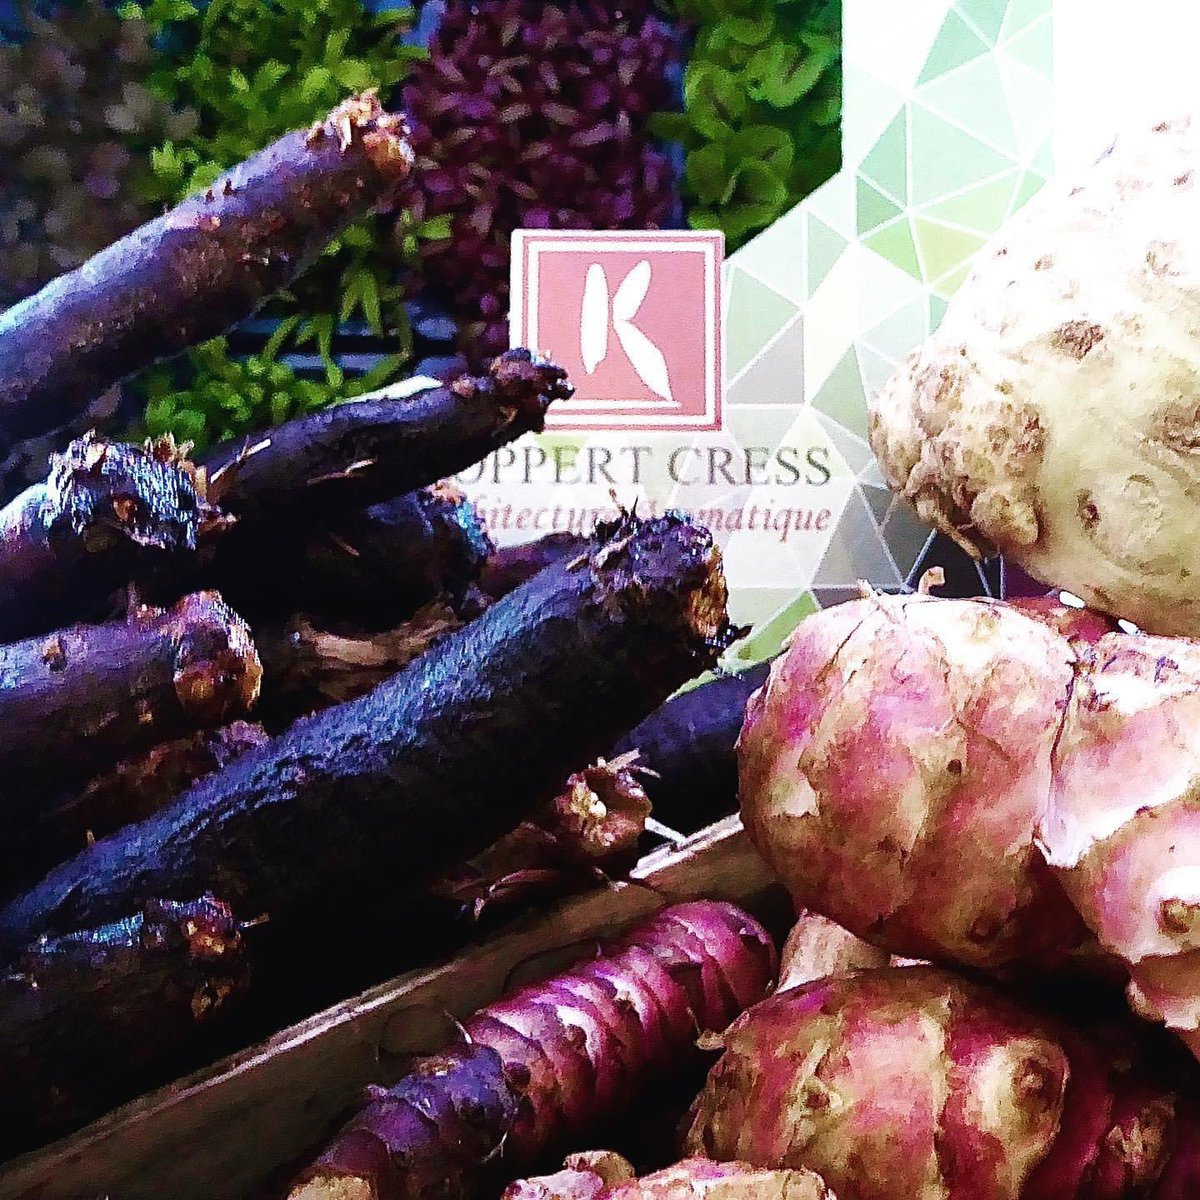 Follow the season with @koppertcress @koppertcressuk Our “what’s new mix “ Autumn edition is now available, ask your fruit and vegetables supplier koppertcress.com/en #autumnvibes🍁 #autumn #plants #plantsbased #roots #foodies #foodoninstagram #kyonacress